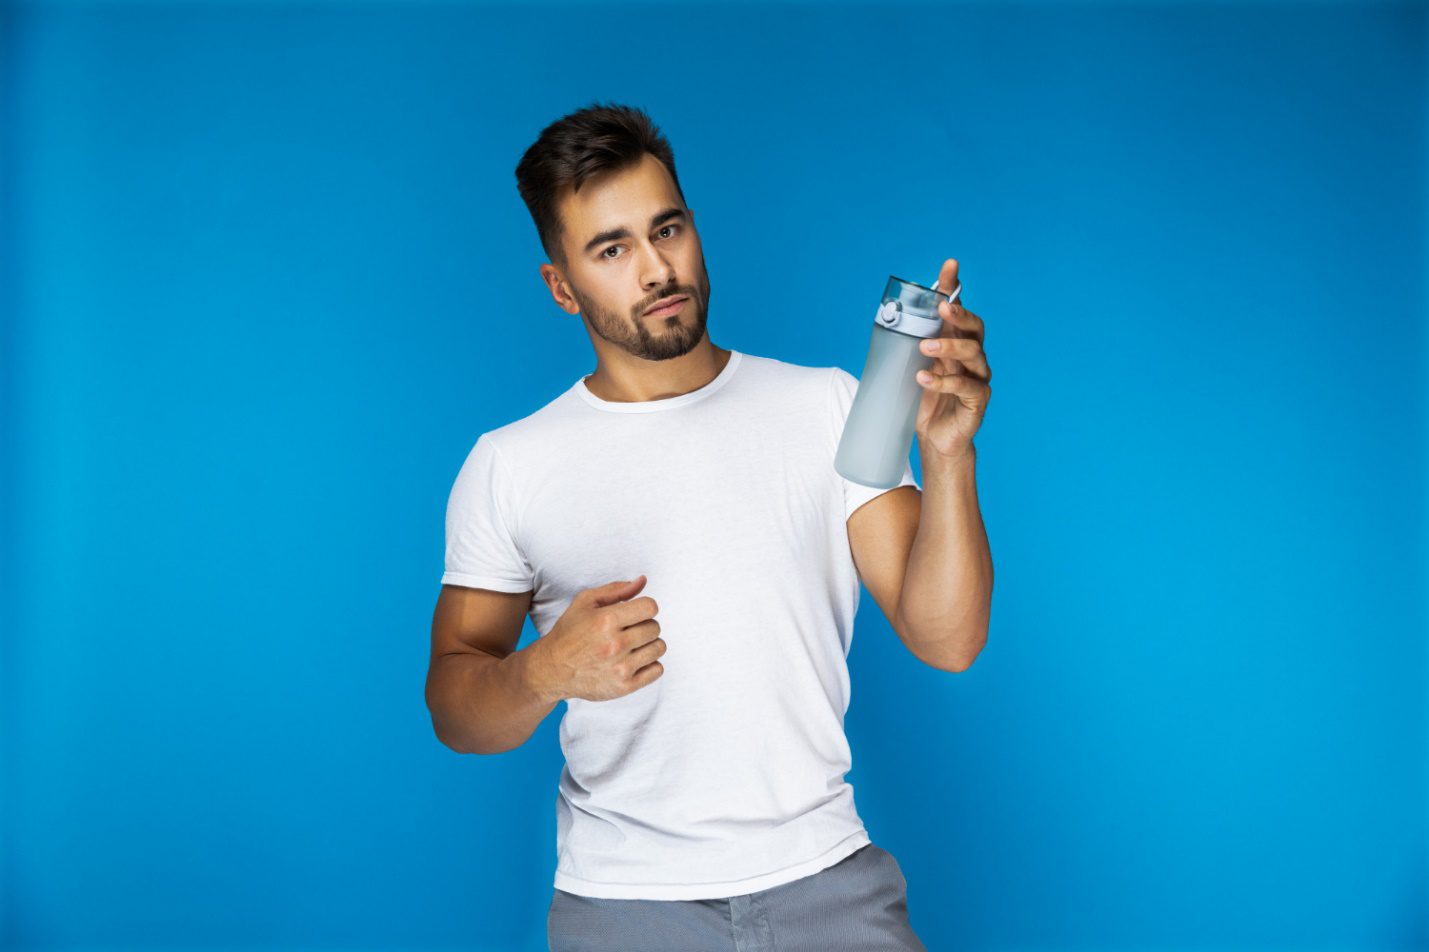 C:\Users\Dell\Downloads\handsome-european-man-white-t-shirt-blue-backgroung-is-holding-sport-bottle-hand.jpg